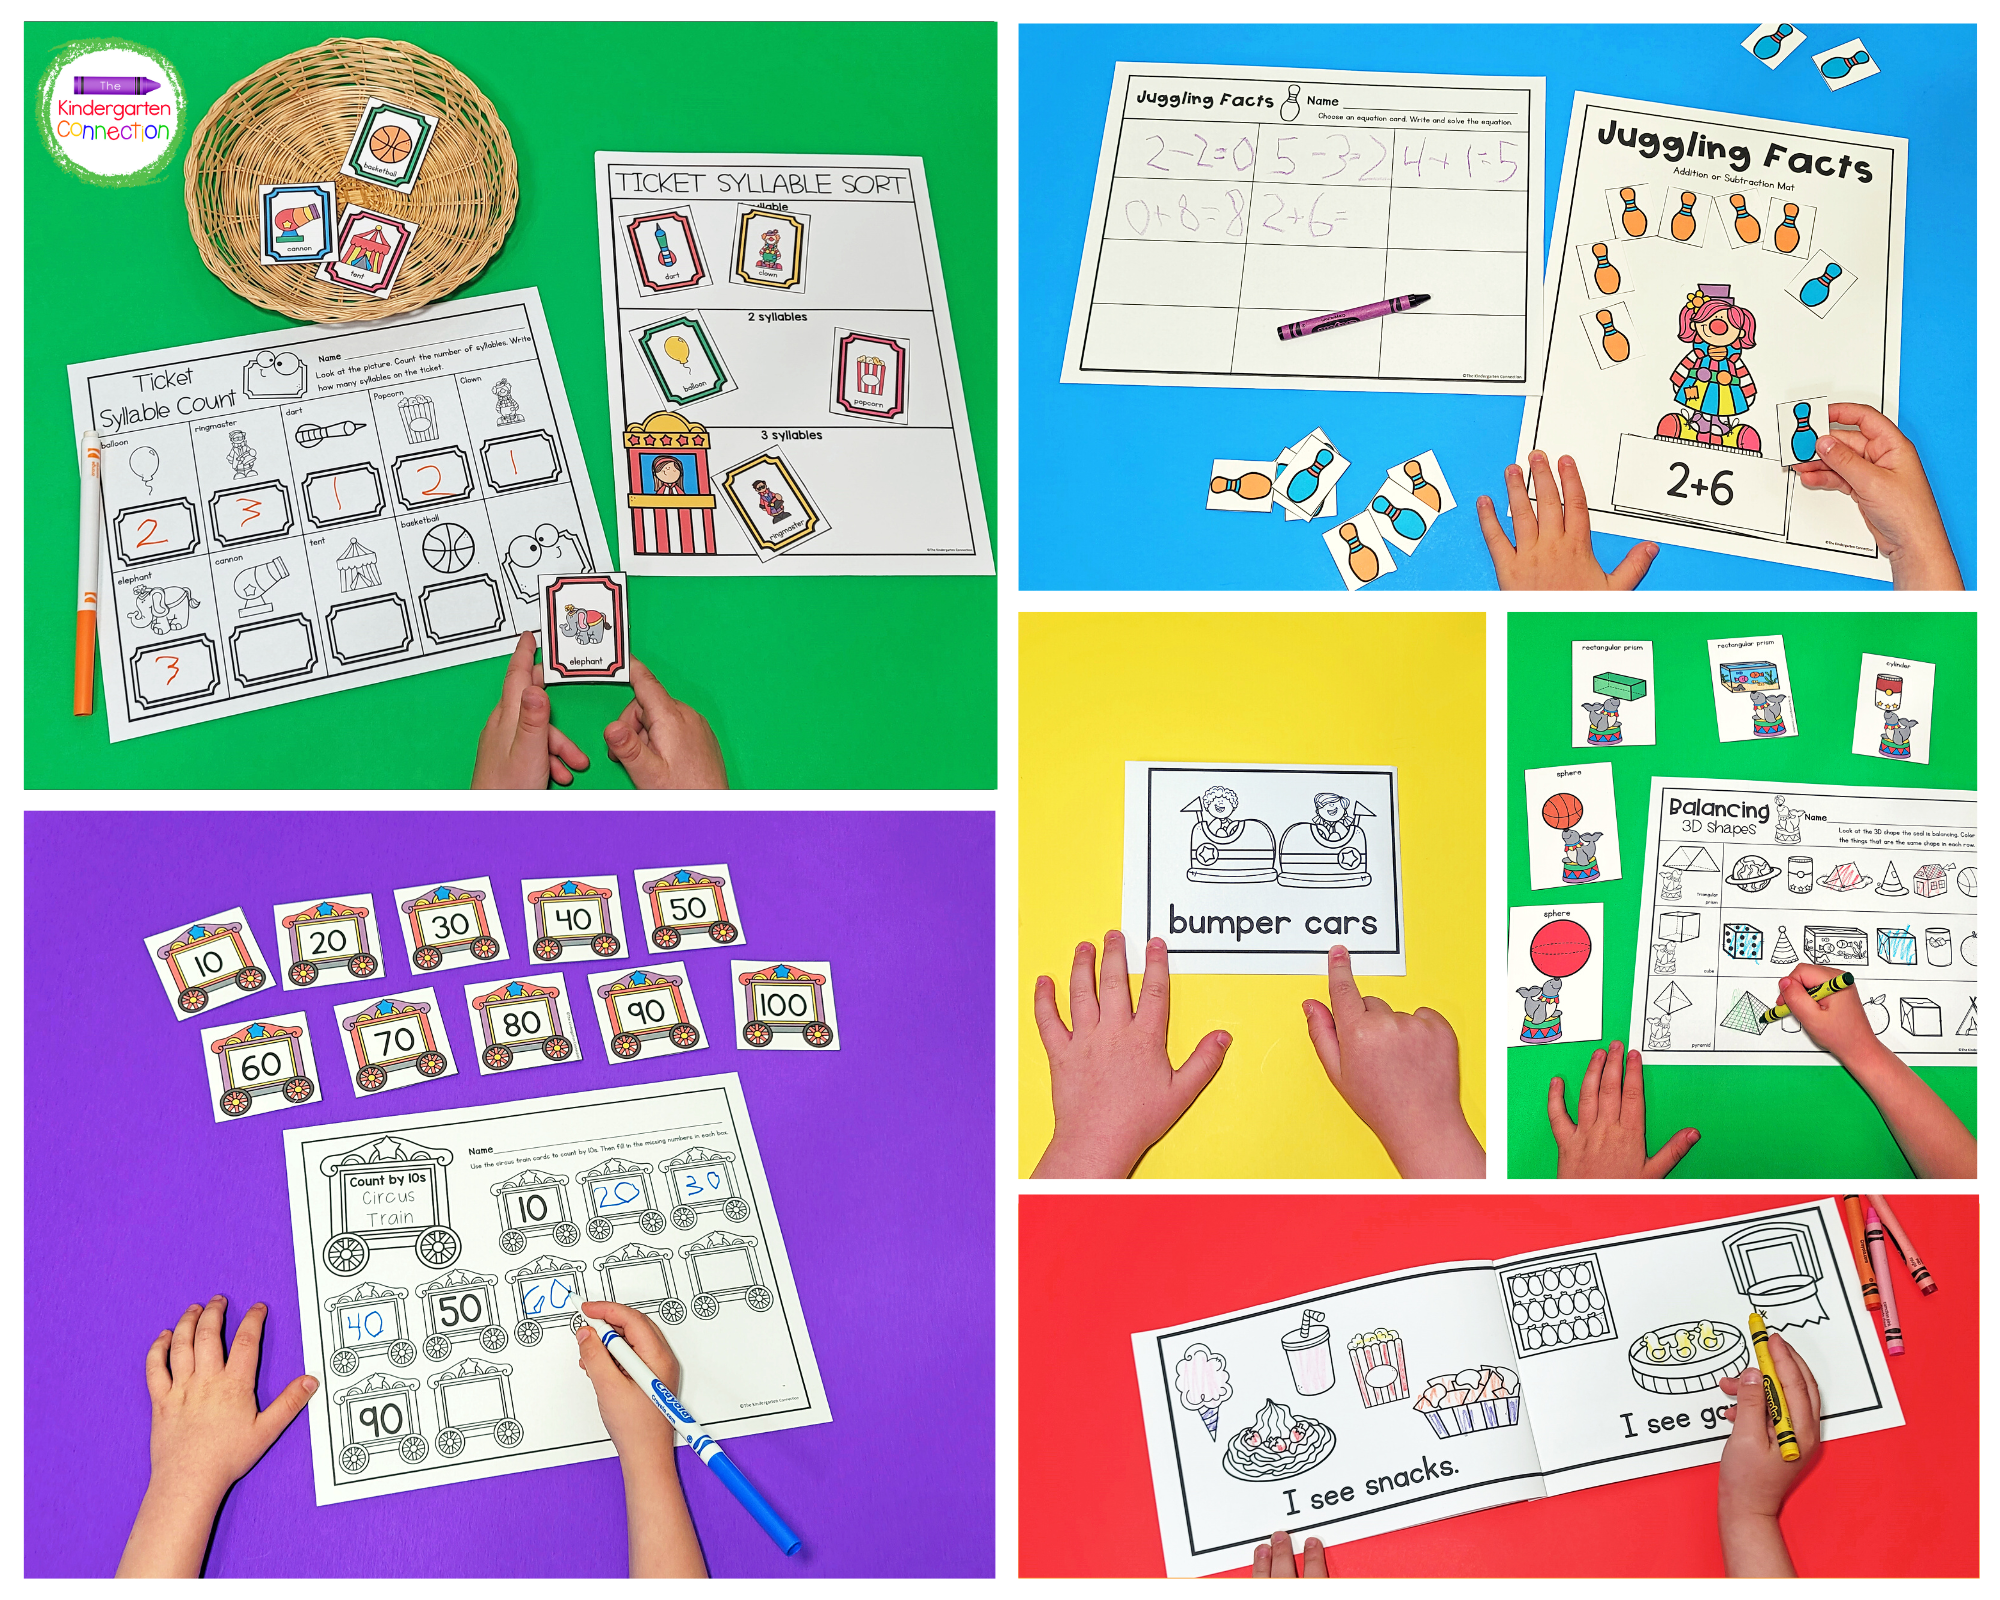 This resource pack includes hands-on circus-themed math and literacy activities.